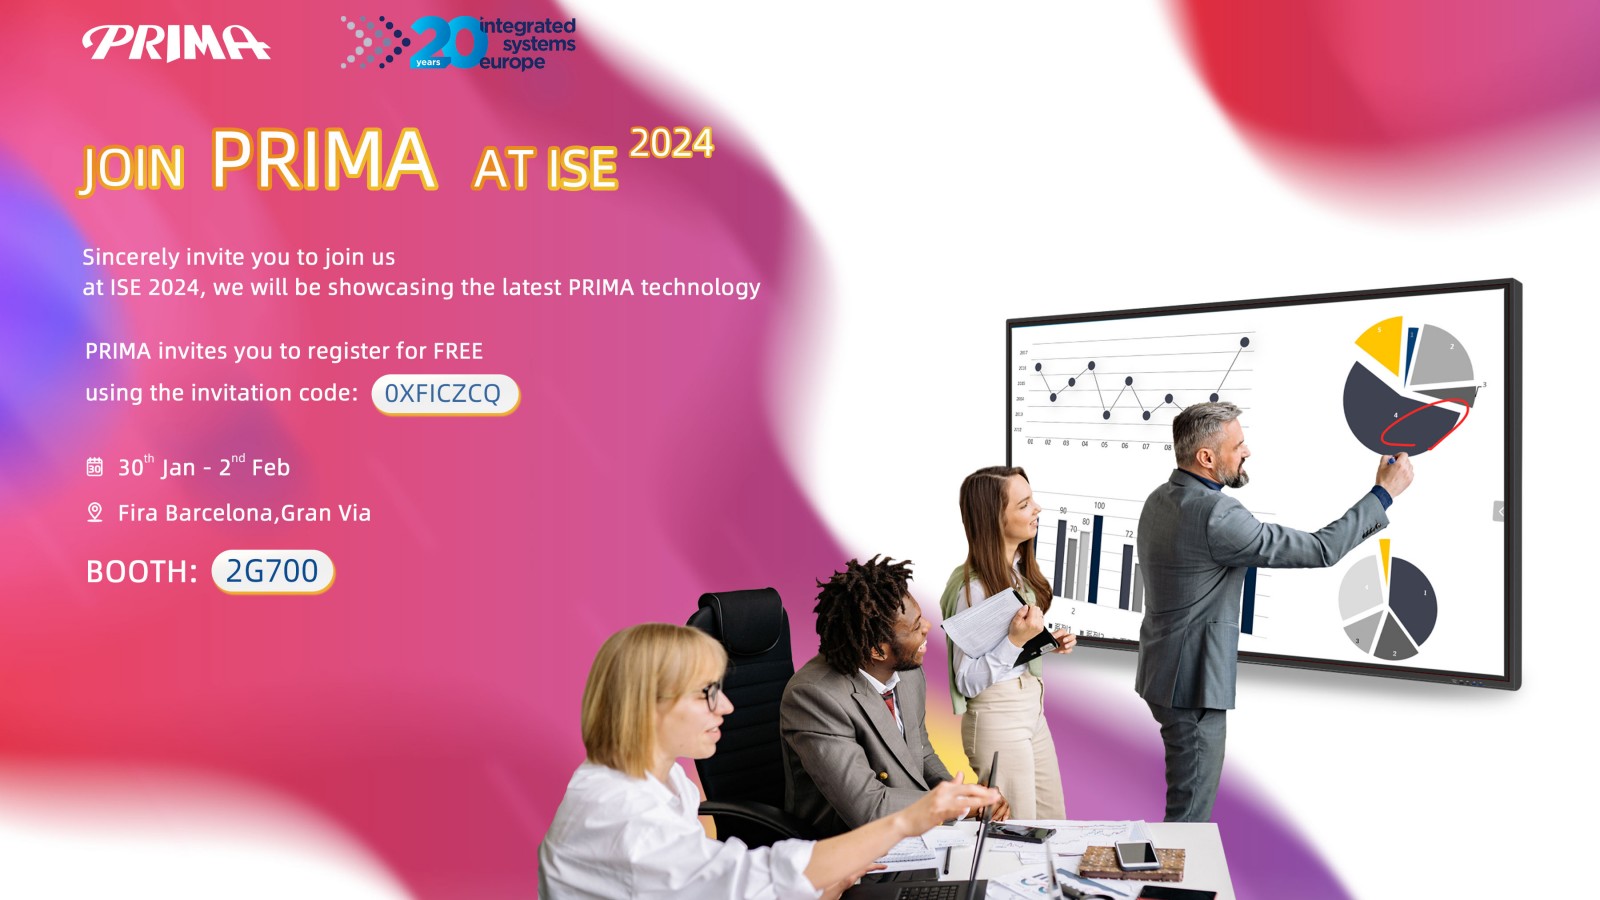 [Exhibition Invitation] PRIMA will meet you at the 2024 Integrated Systems Europe